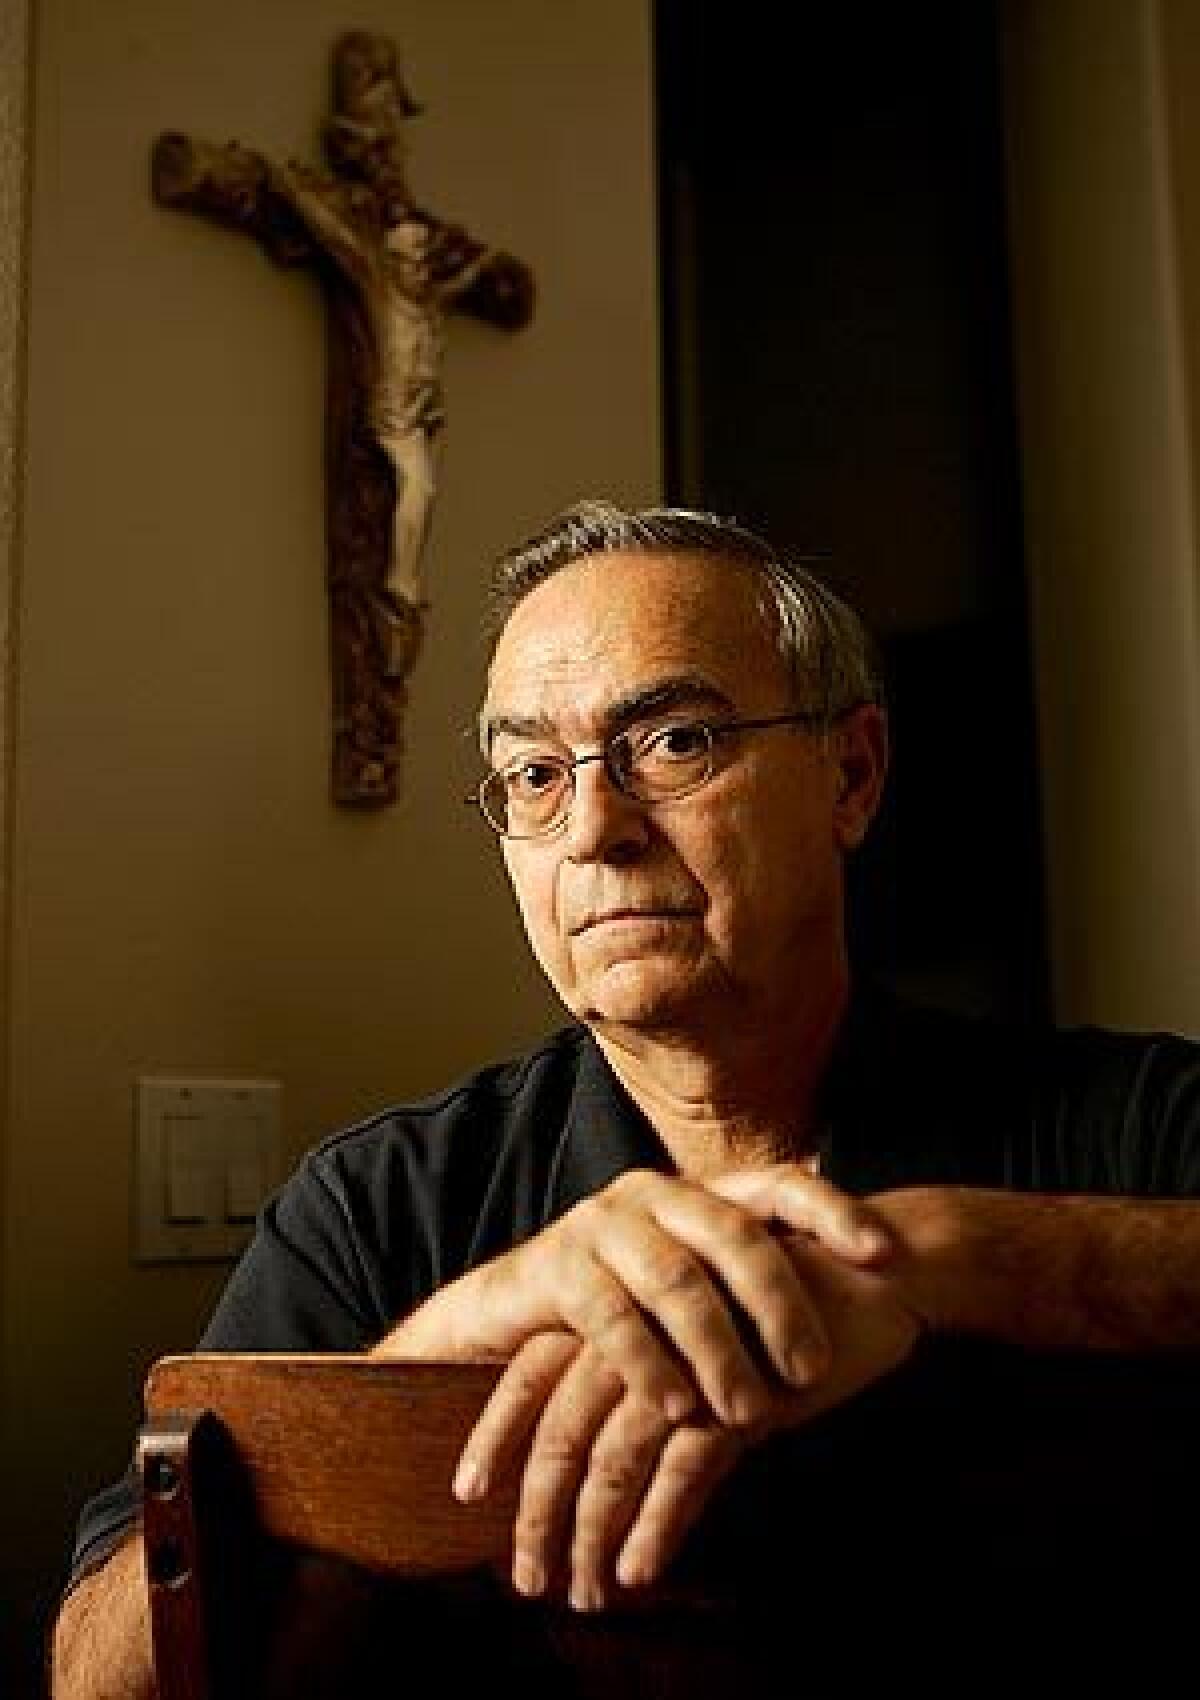 Donald Ashman, seen at his Thousand Oaks home, is an Anglican priest who was a passenger on the Metrolink train that crashed Friday in Chatsworth. Though still in a daze from the collision, he administered last rites to people who died at the scene.